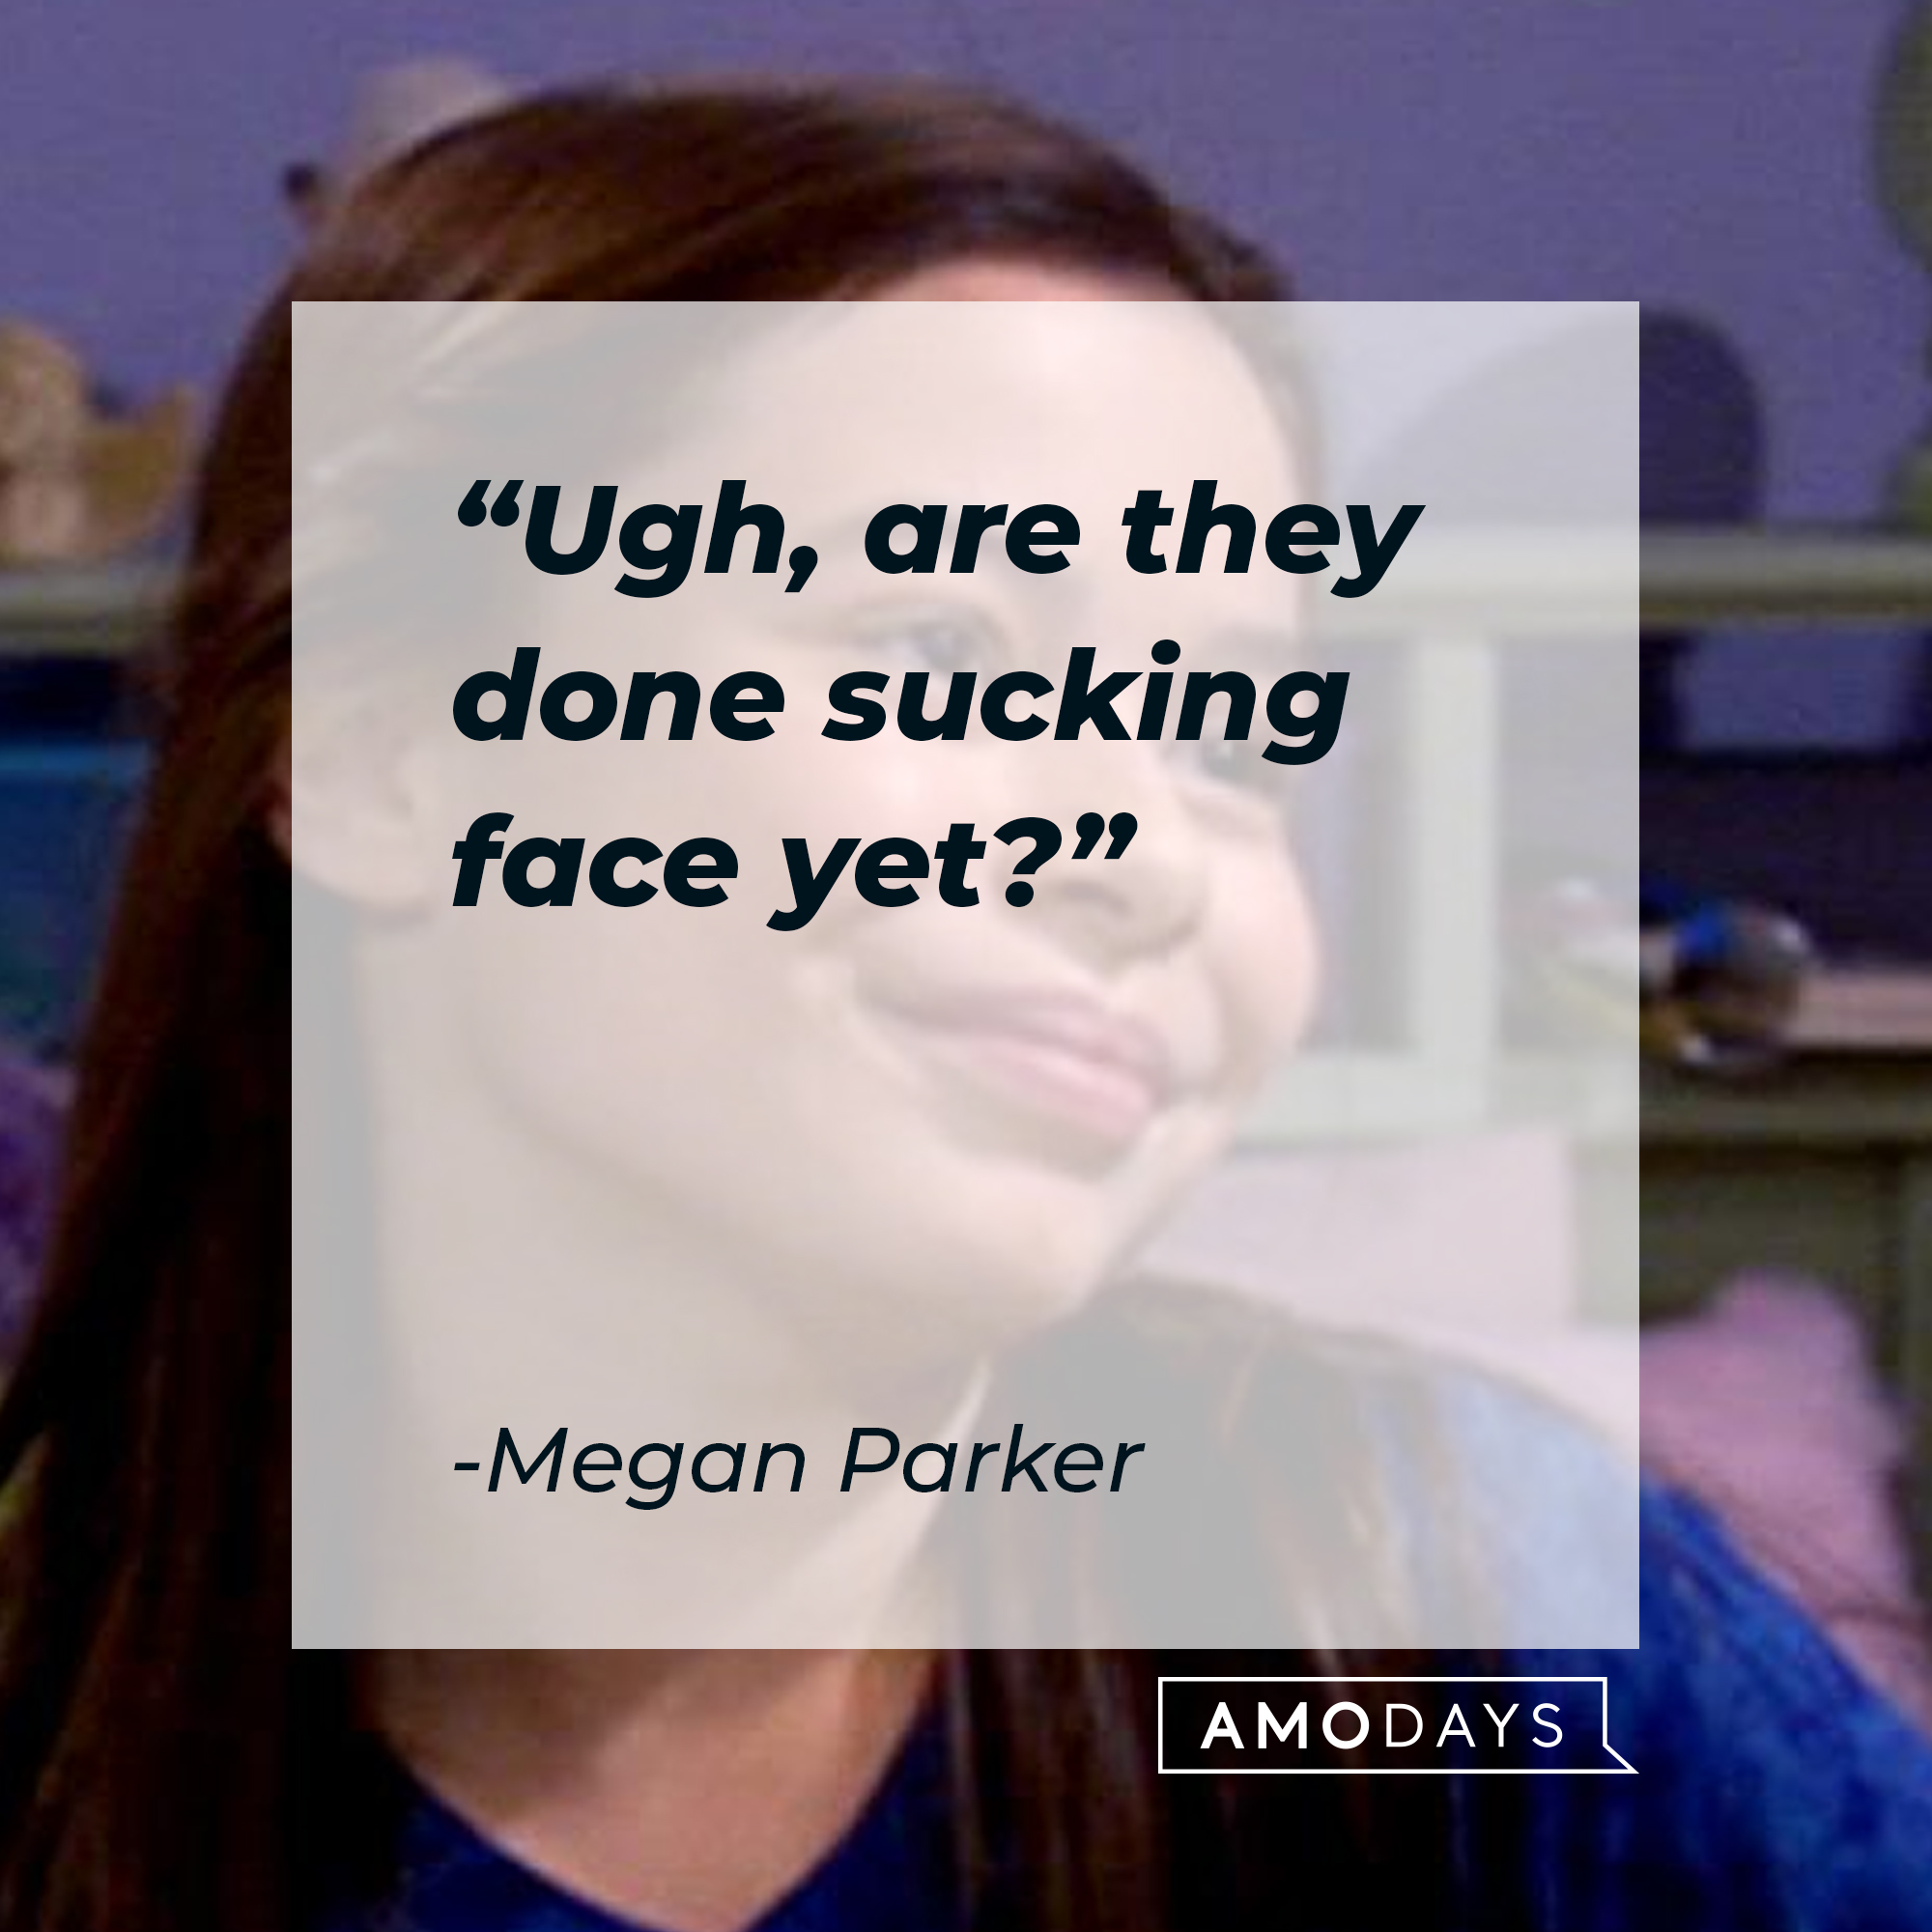 Megan Parker's quote, "Ugh, are they done sucking face yet?" | Source: facebook.com/Drake & Josh